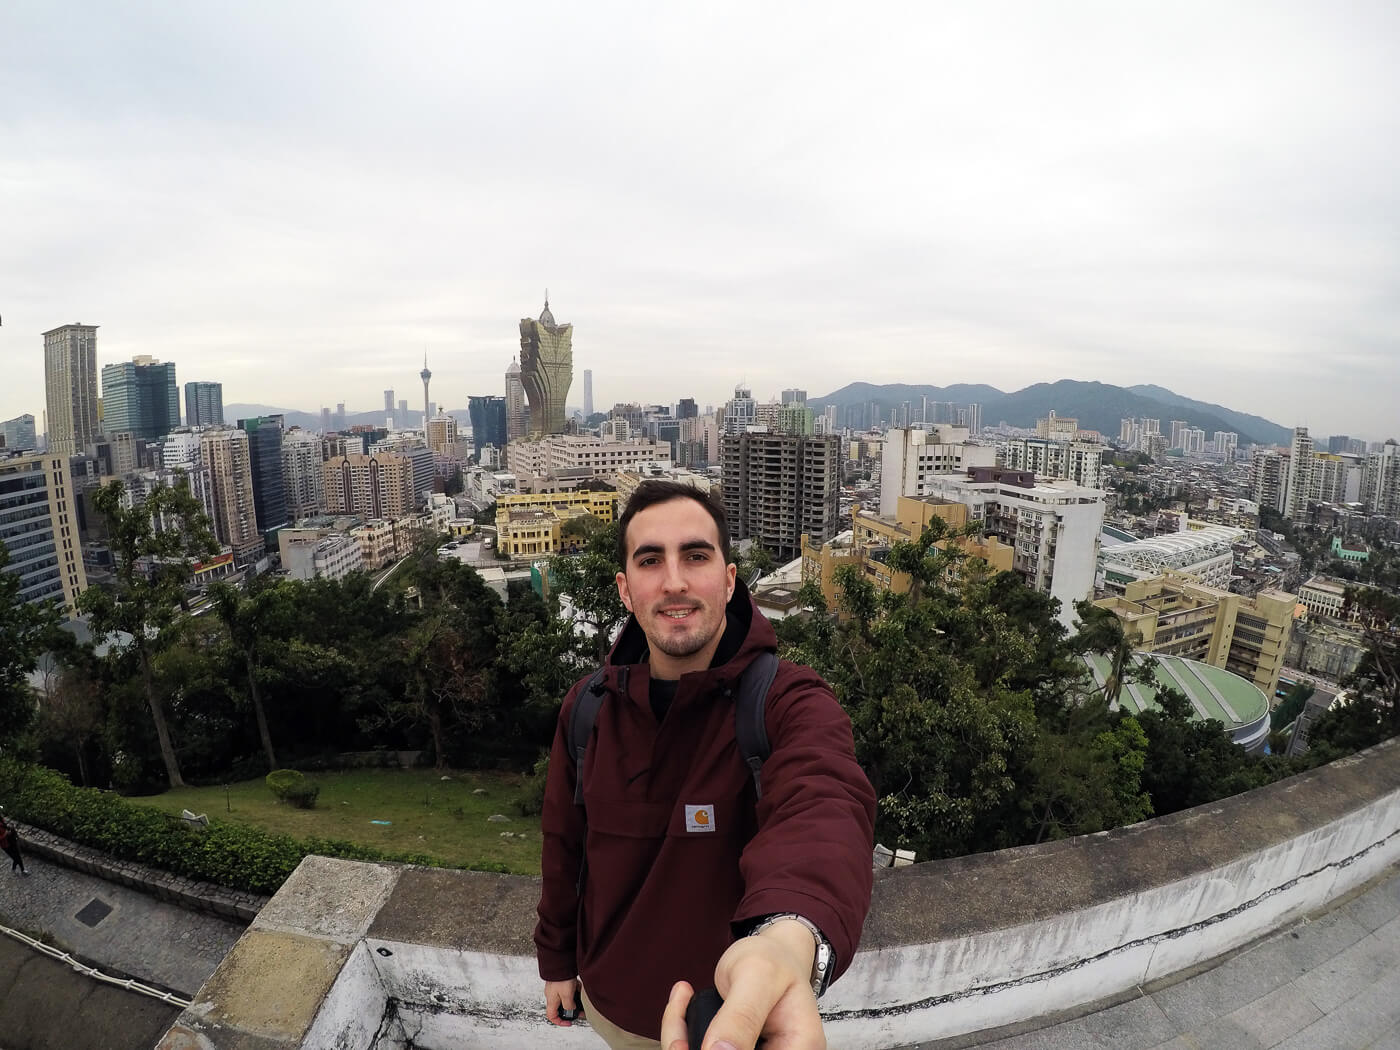 Selfie in Macau, China with the Grand Lisboa Casino in the background